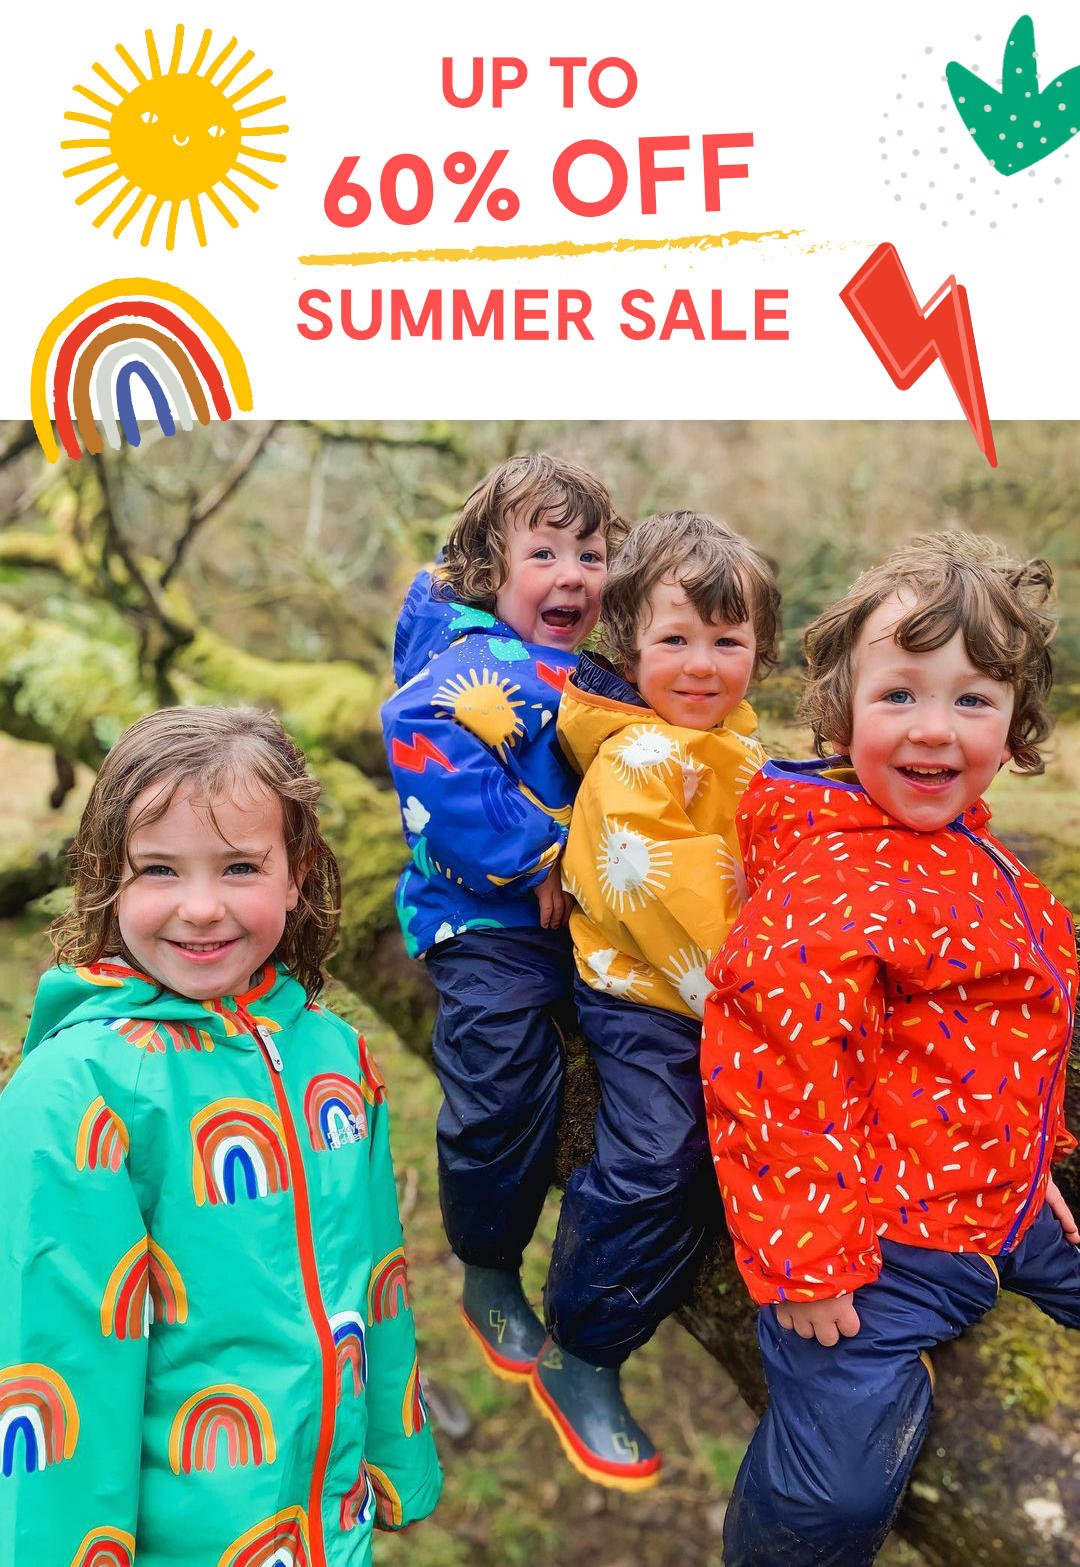 Summer sale- up to 50% Off